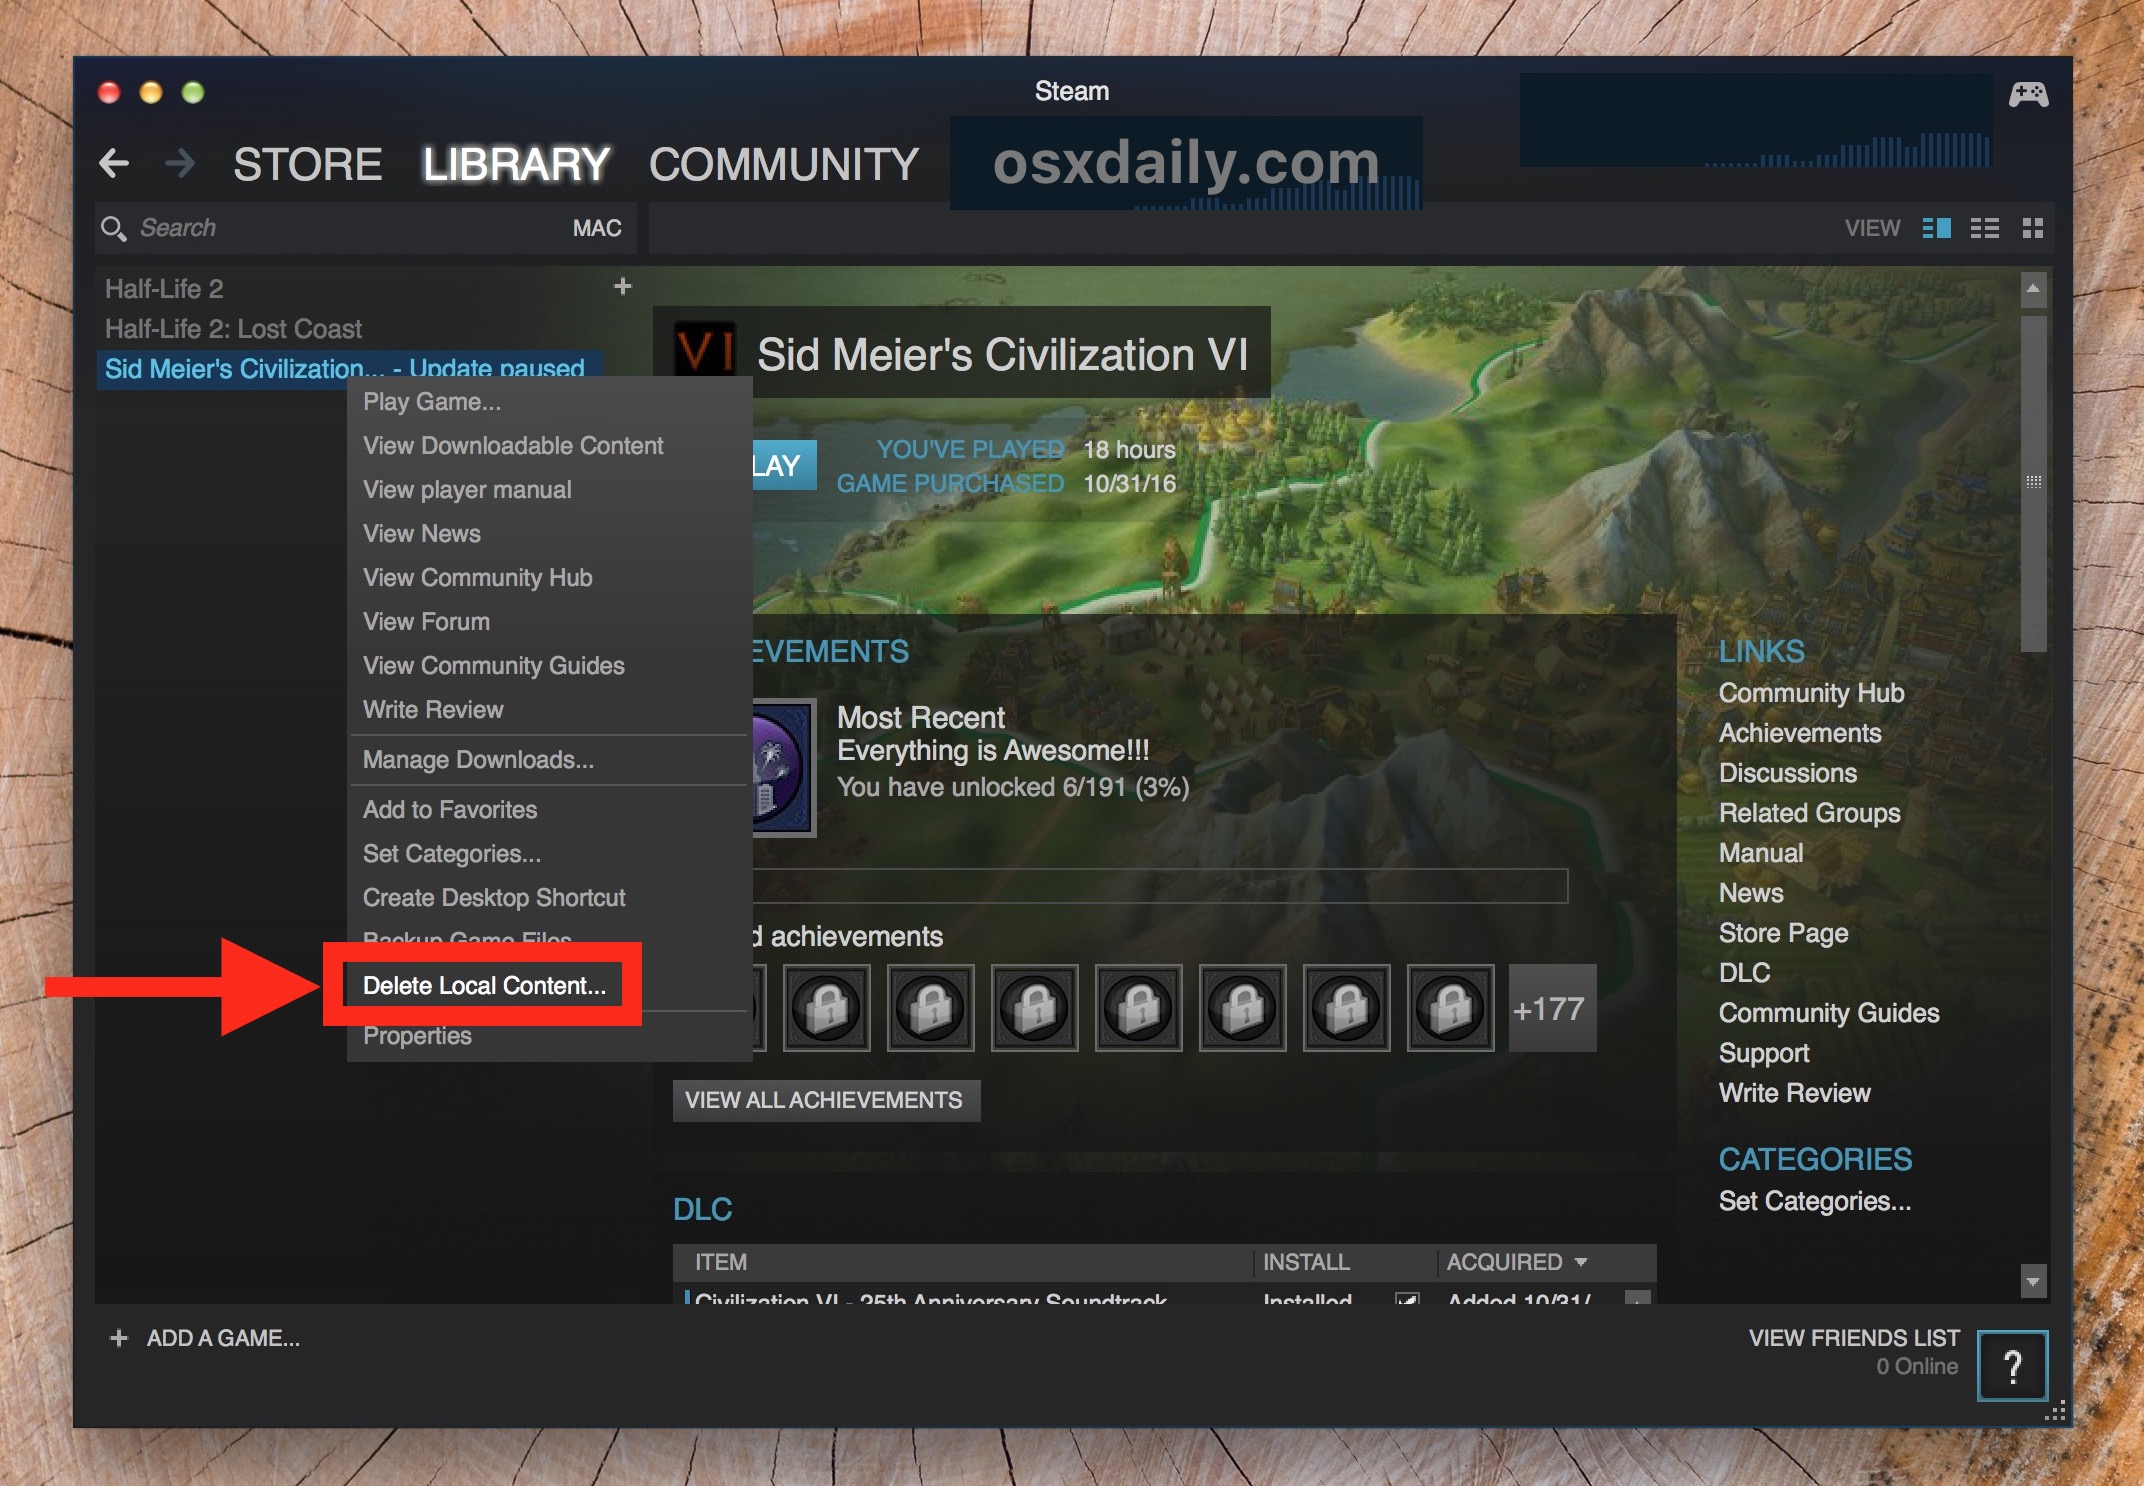 How to uninstall Steam games and delete the game from the computer